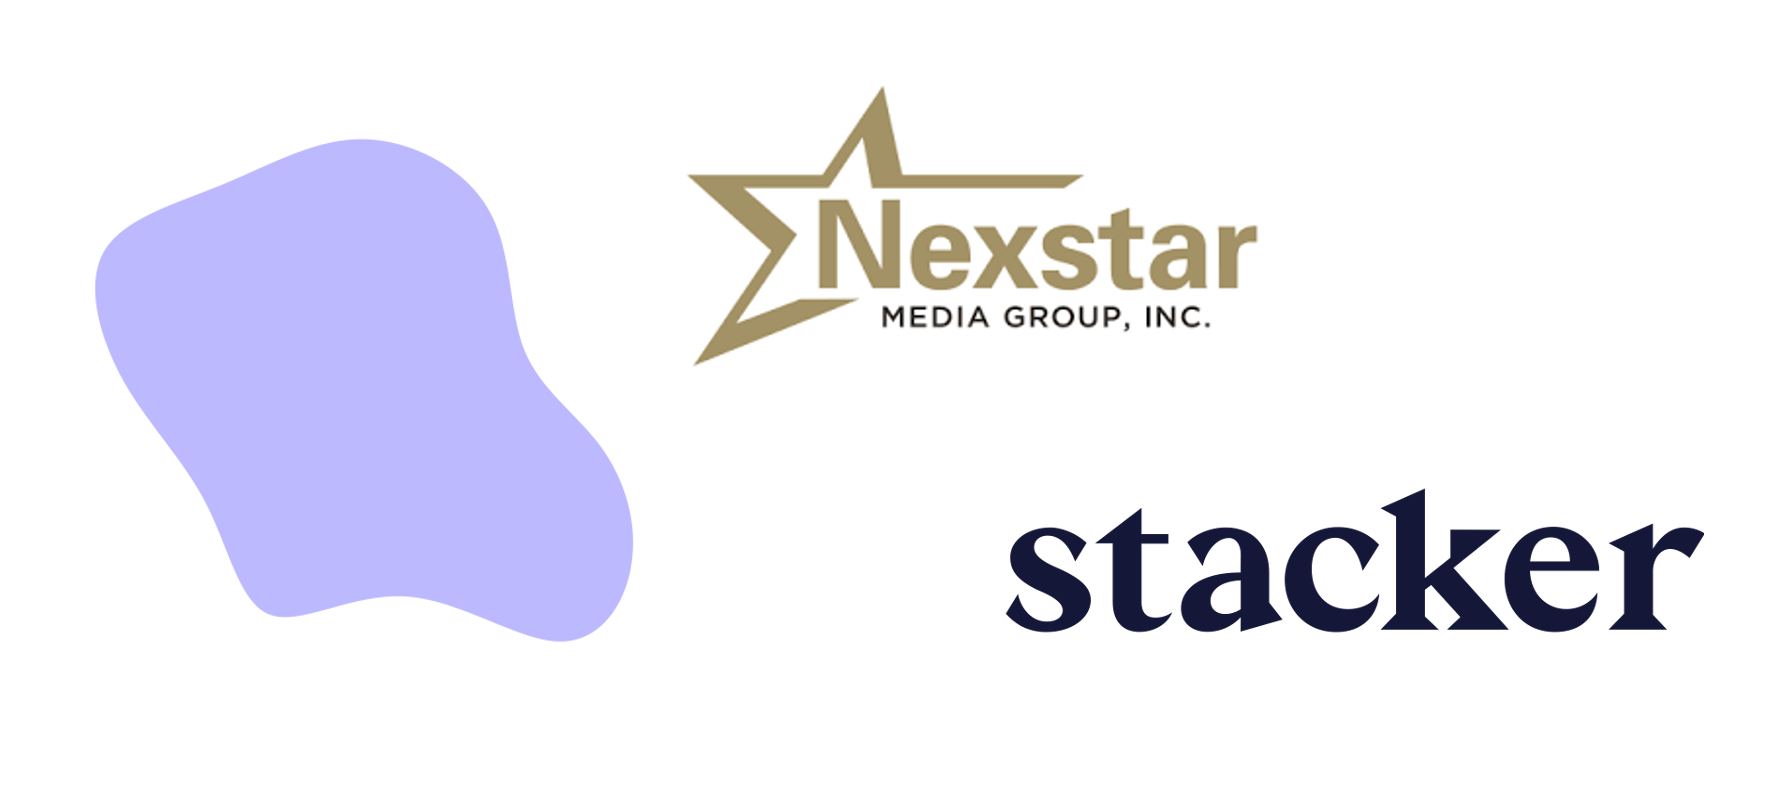 How Nexstar works with Stacker to go beyond the daily news cycle